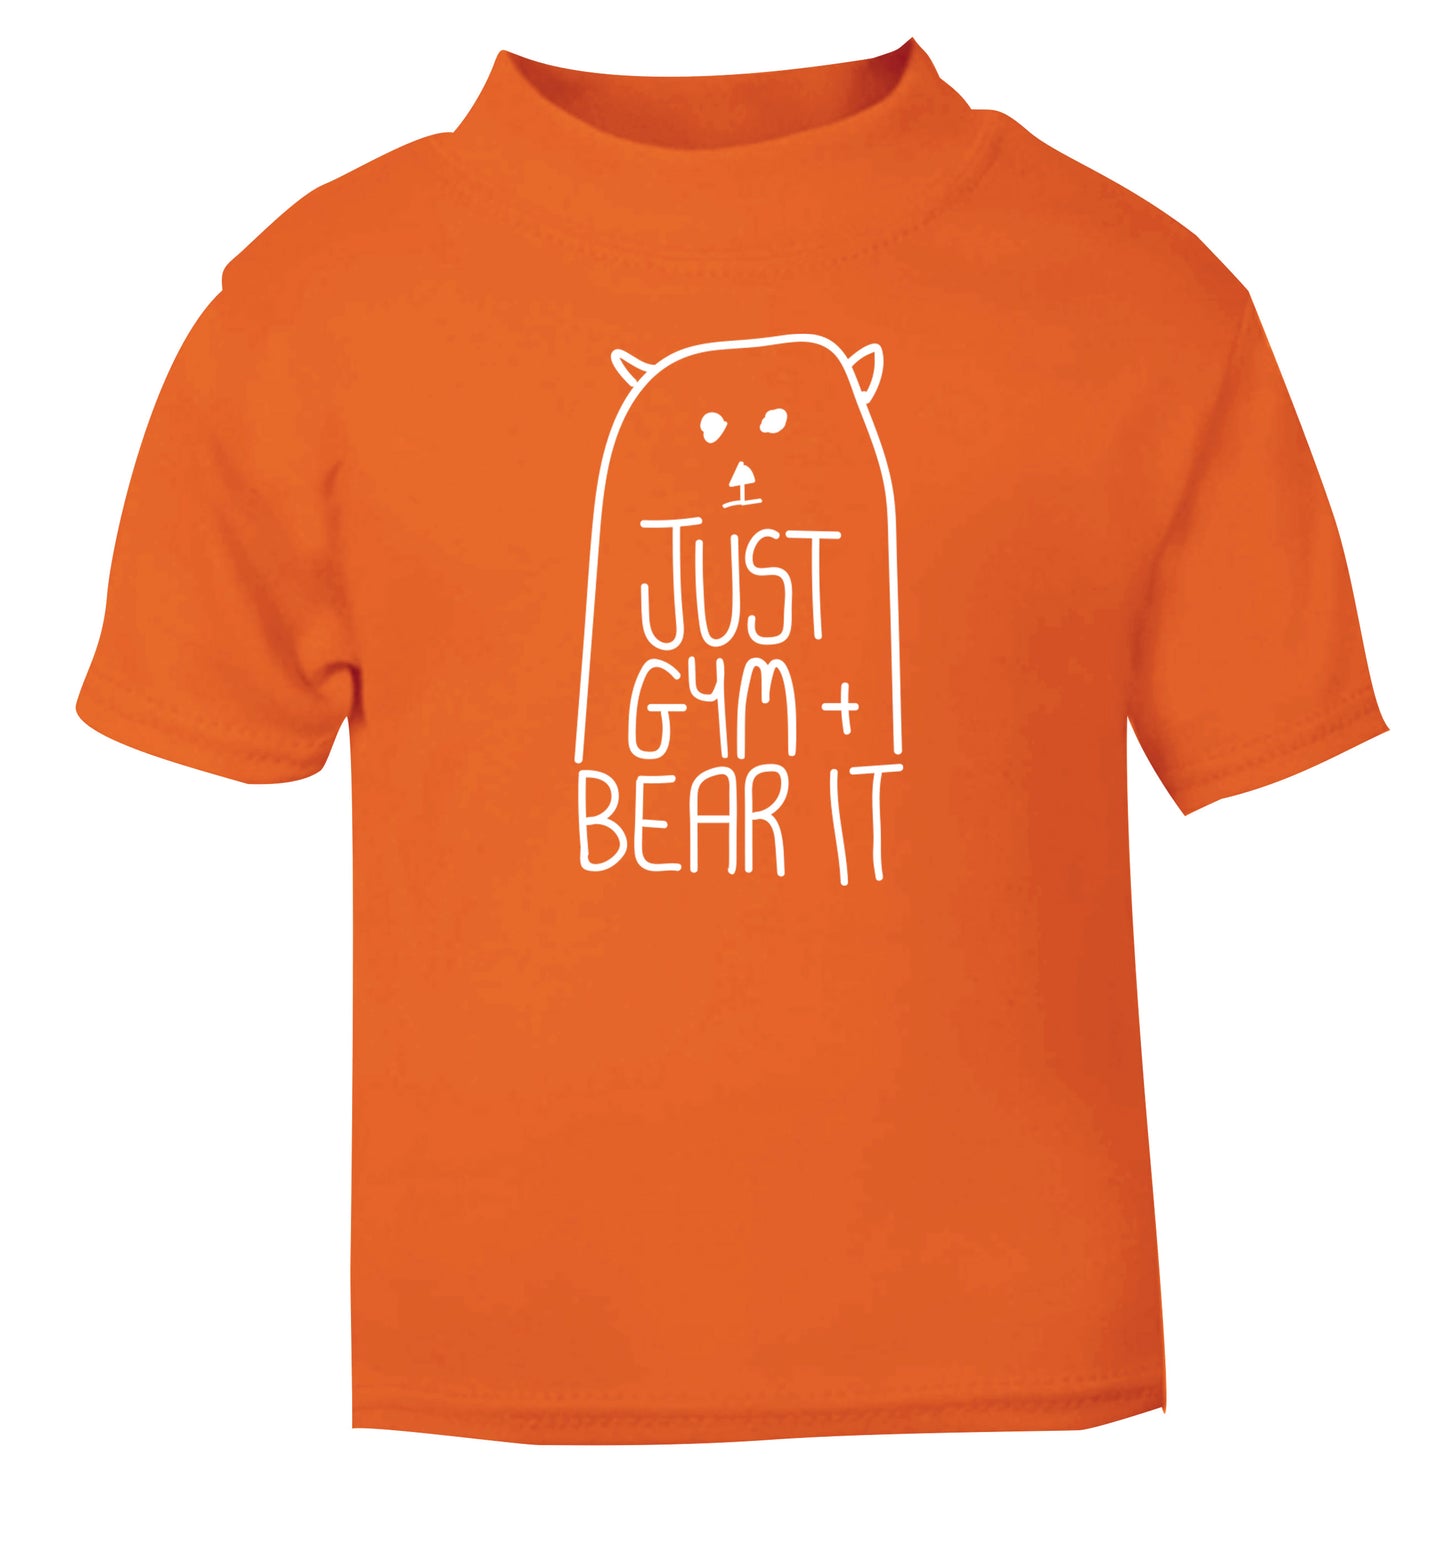 Just gym and bear it orange Baby Toddler Tshirt 2 Years